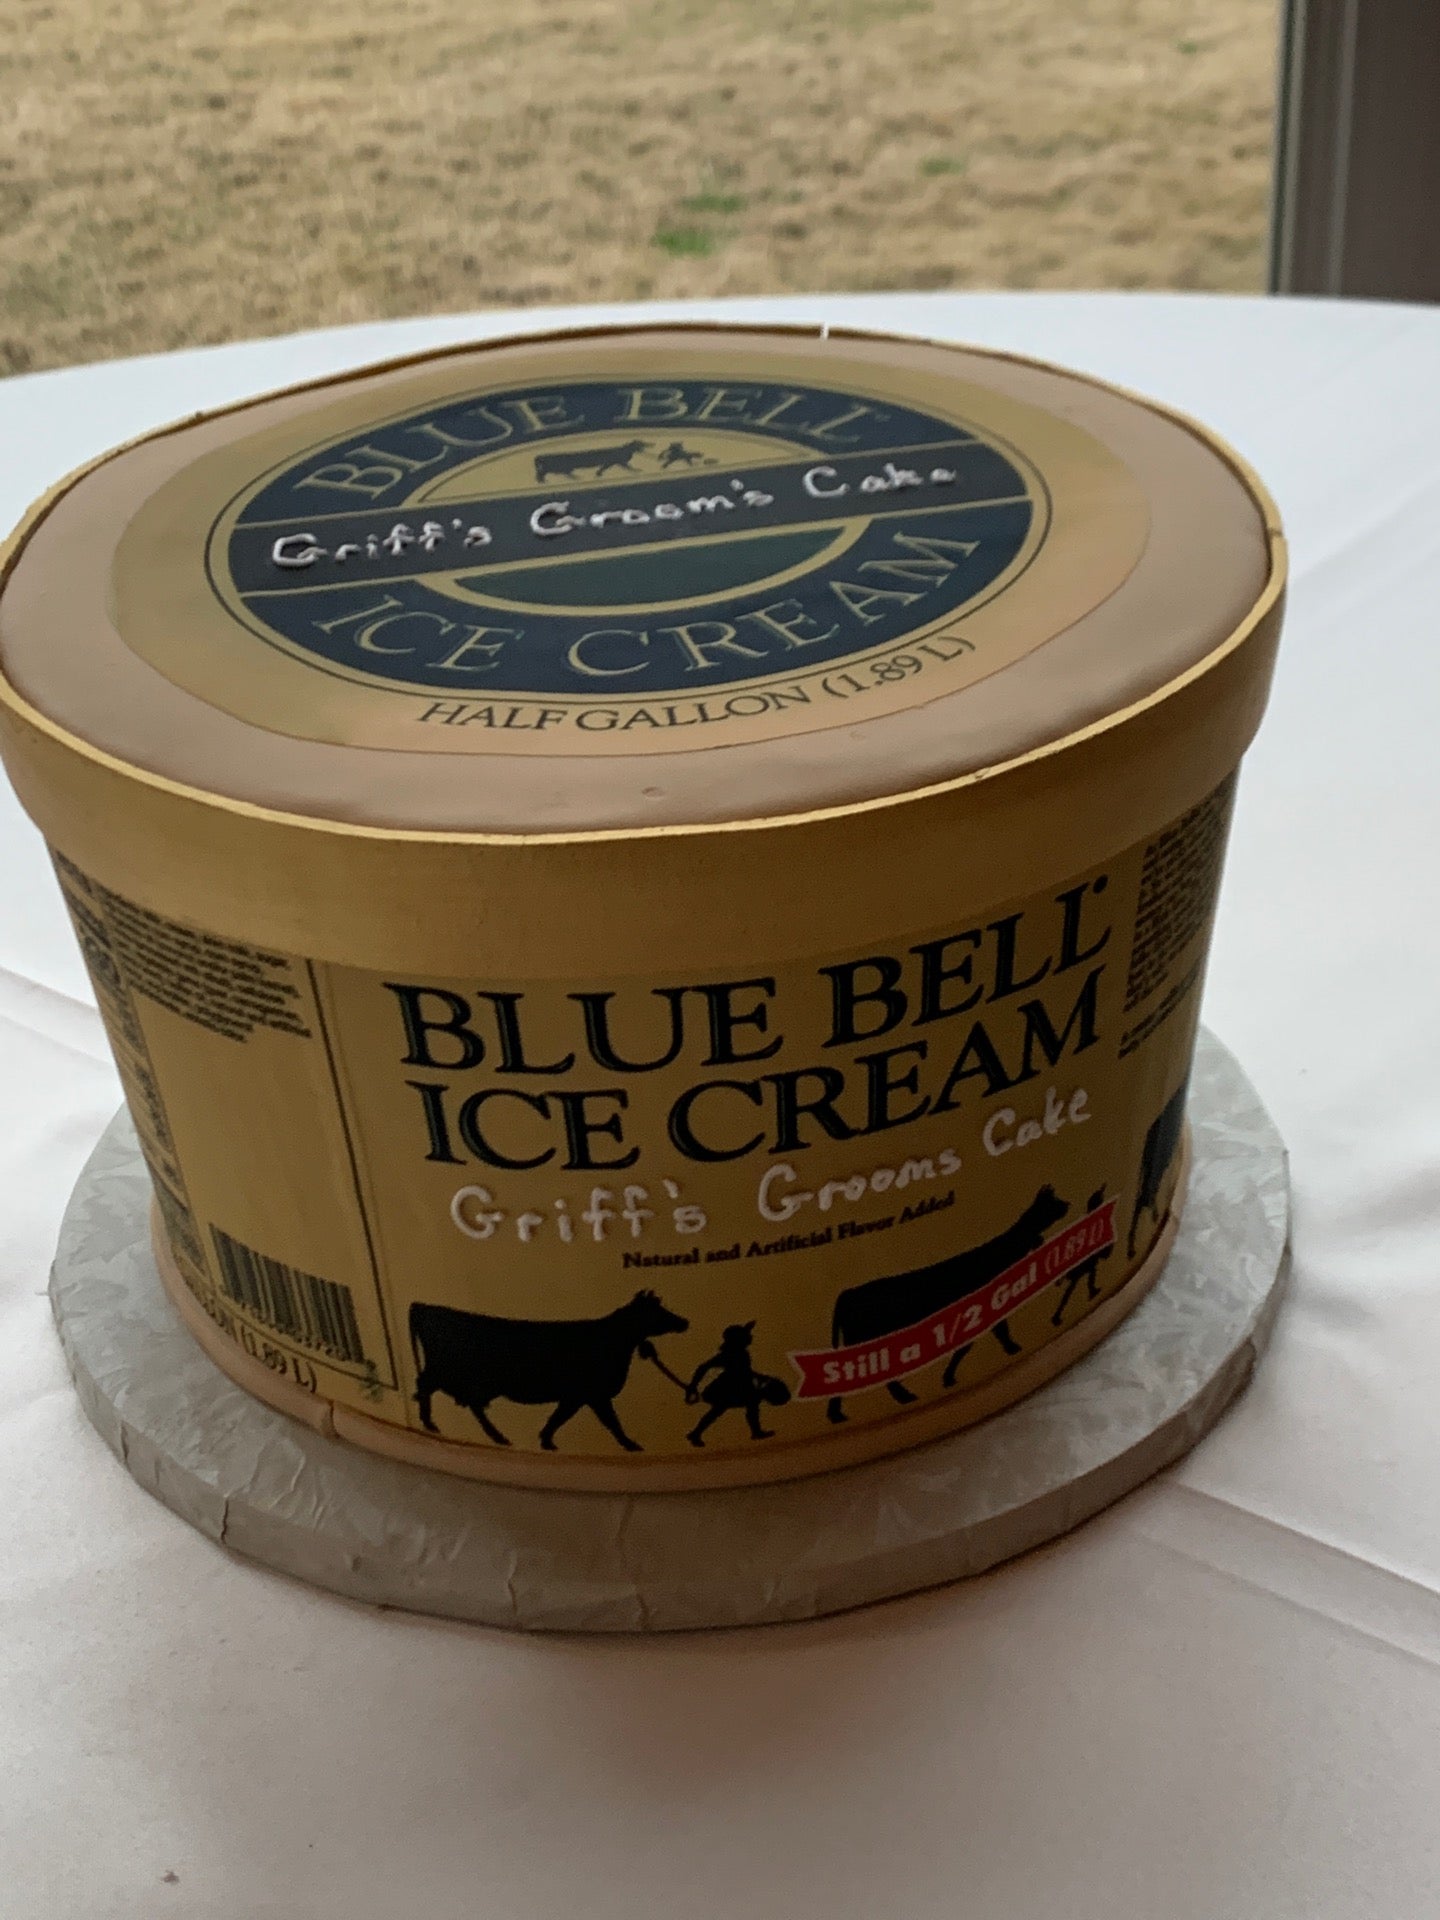 Fun Sized Review: Blue Bell's Groom's Cake - YouTube